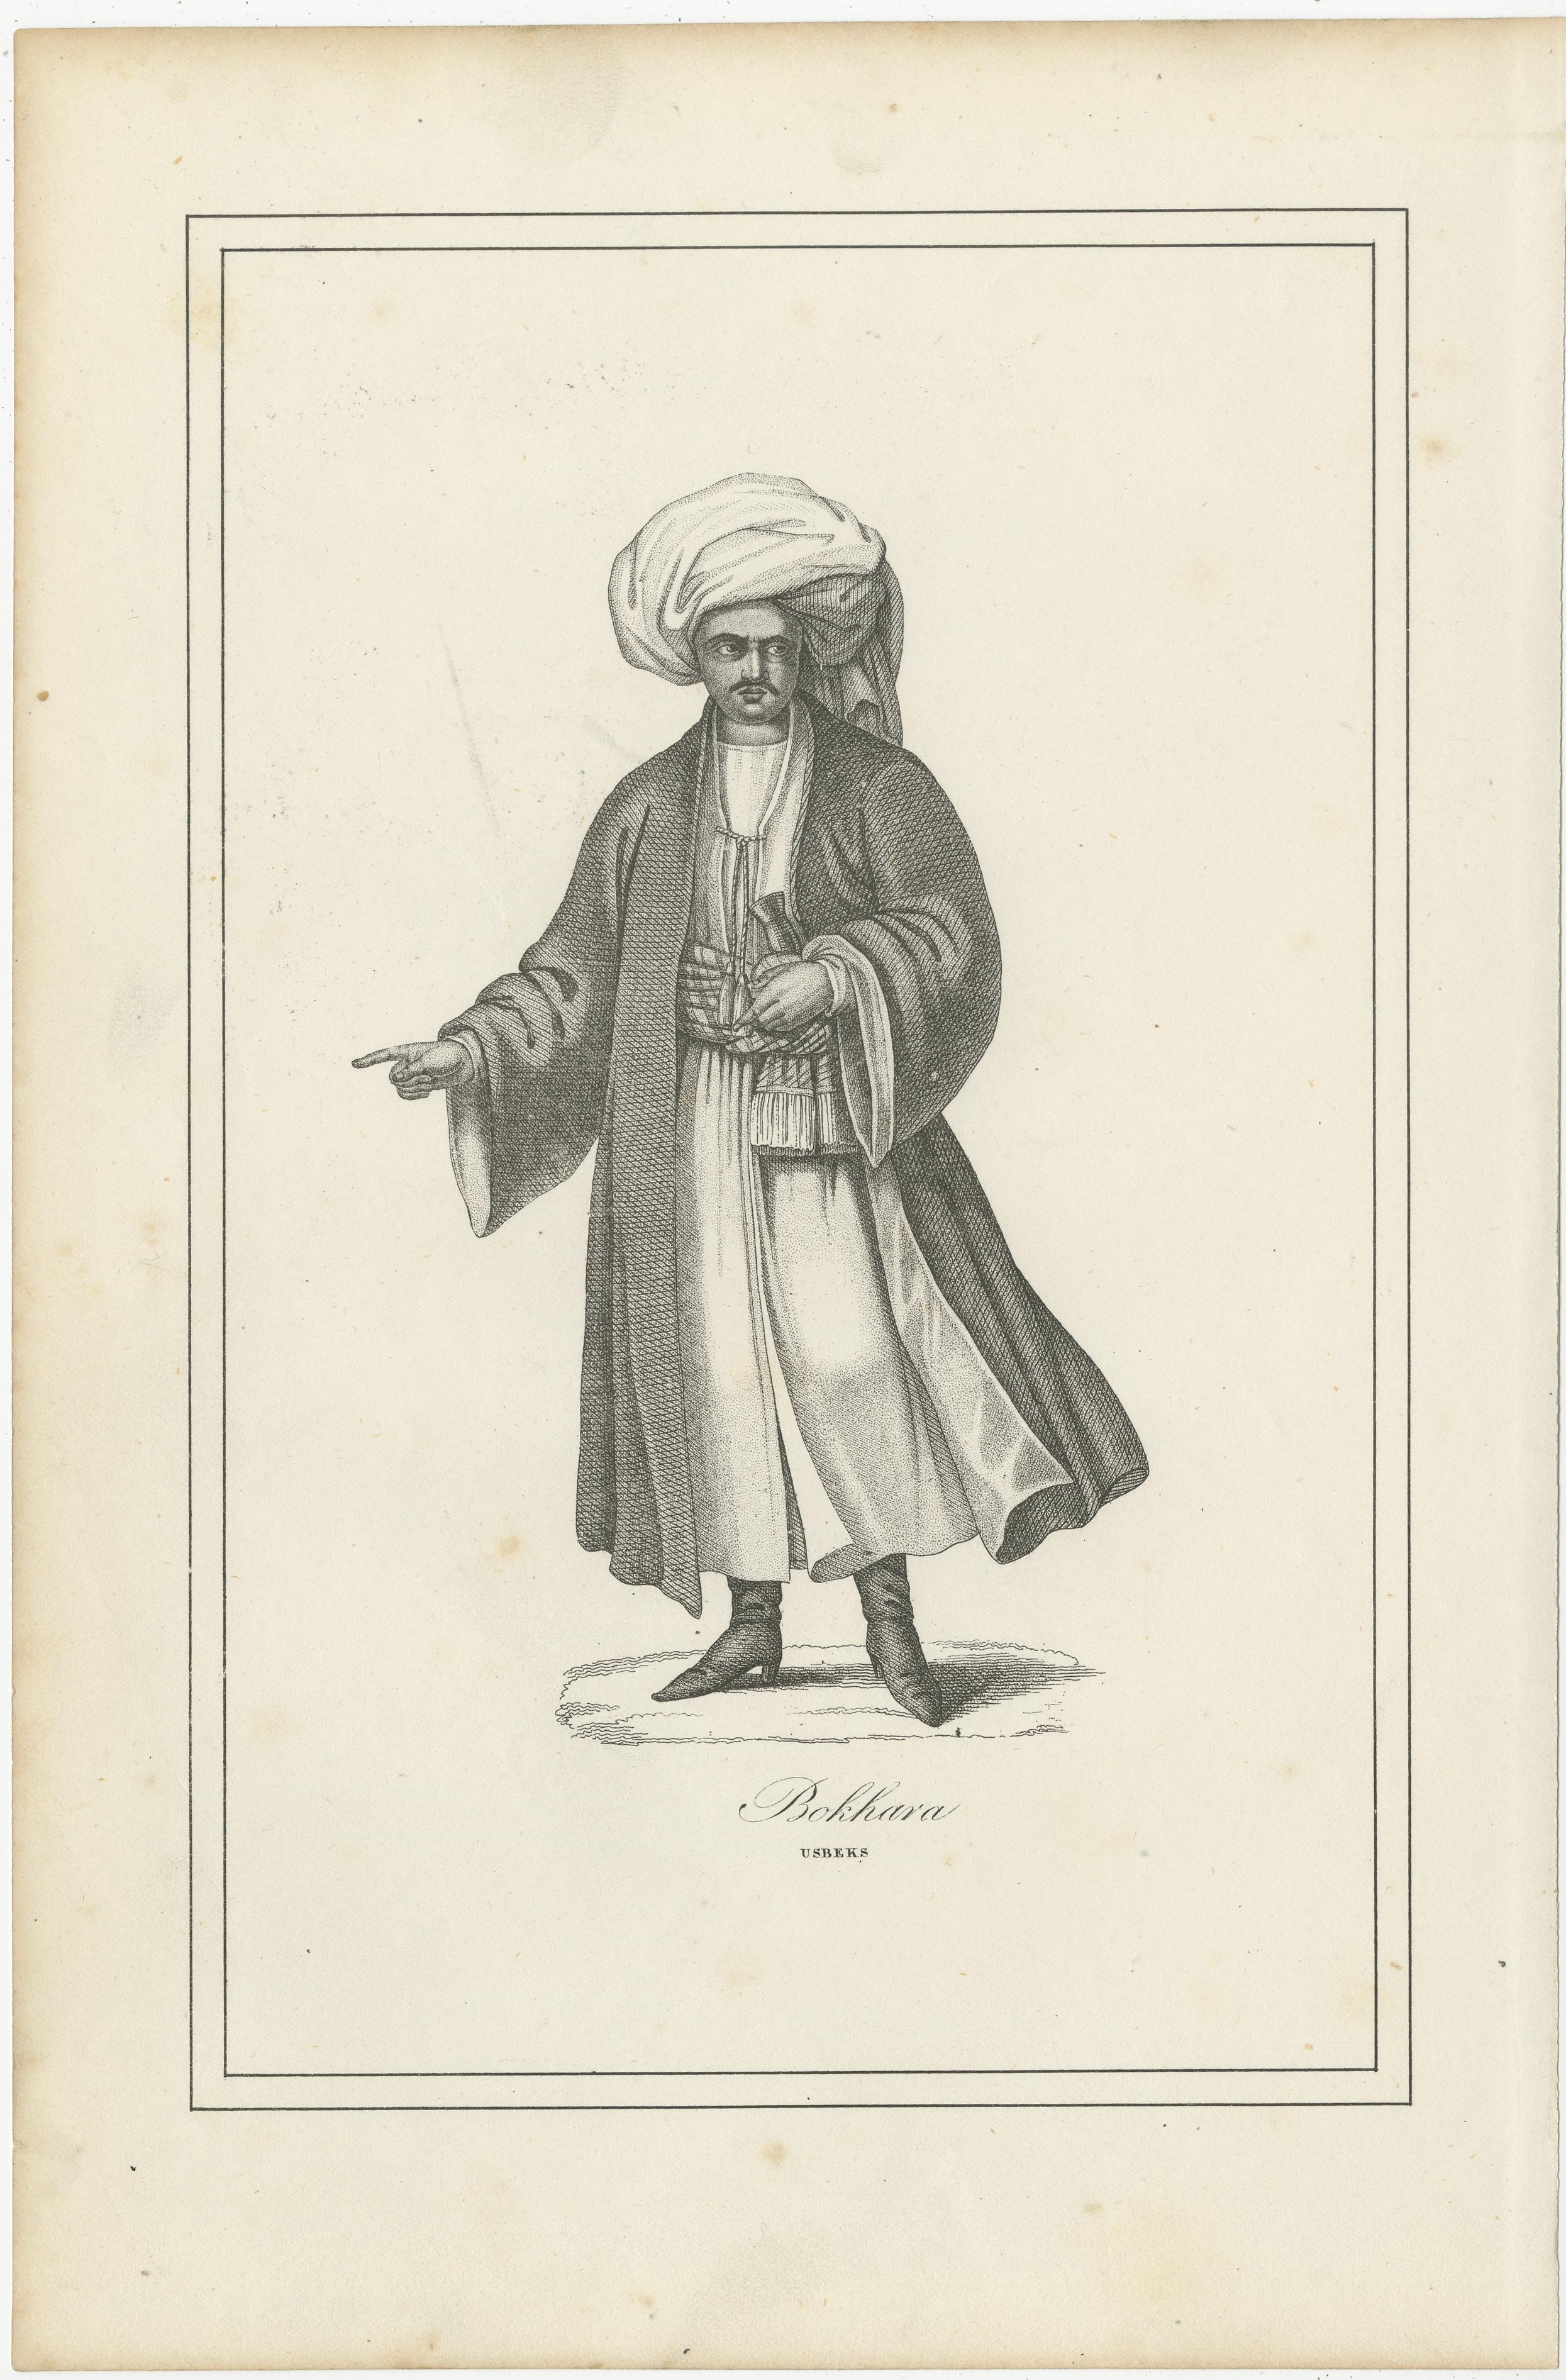 Antique print titled 'Bokhara, Usbeks'. Original print of a native of Bukhara, Uzbekistan. Source unknown, to be determined. Published, circa 1880.